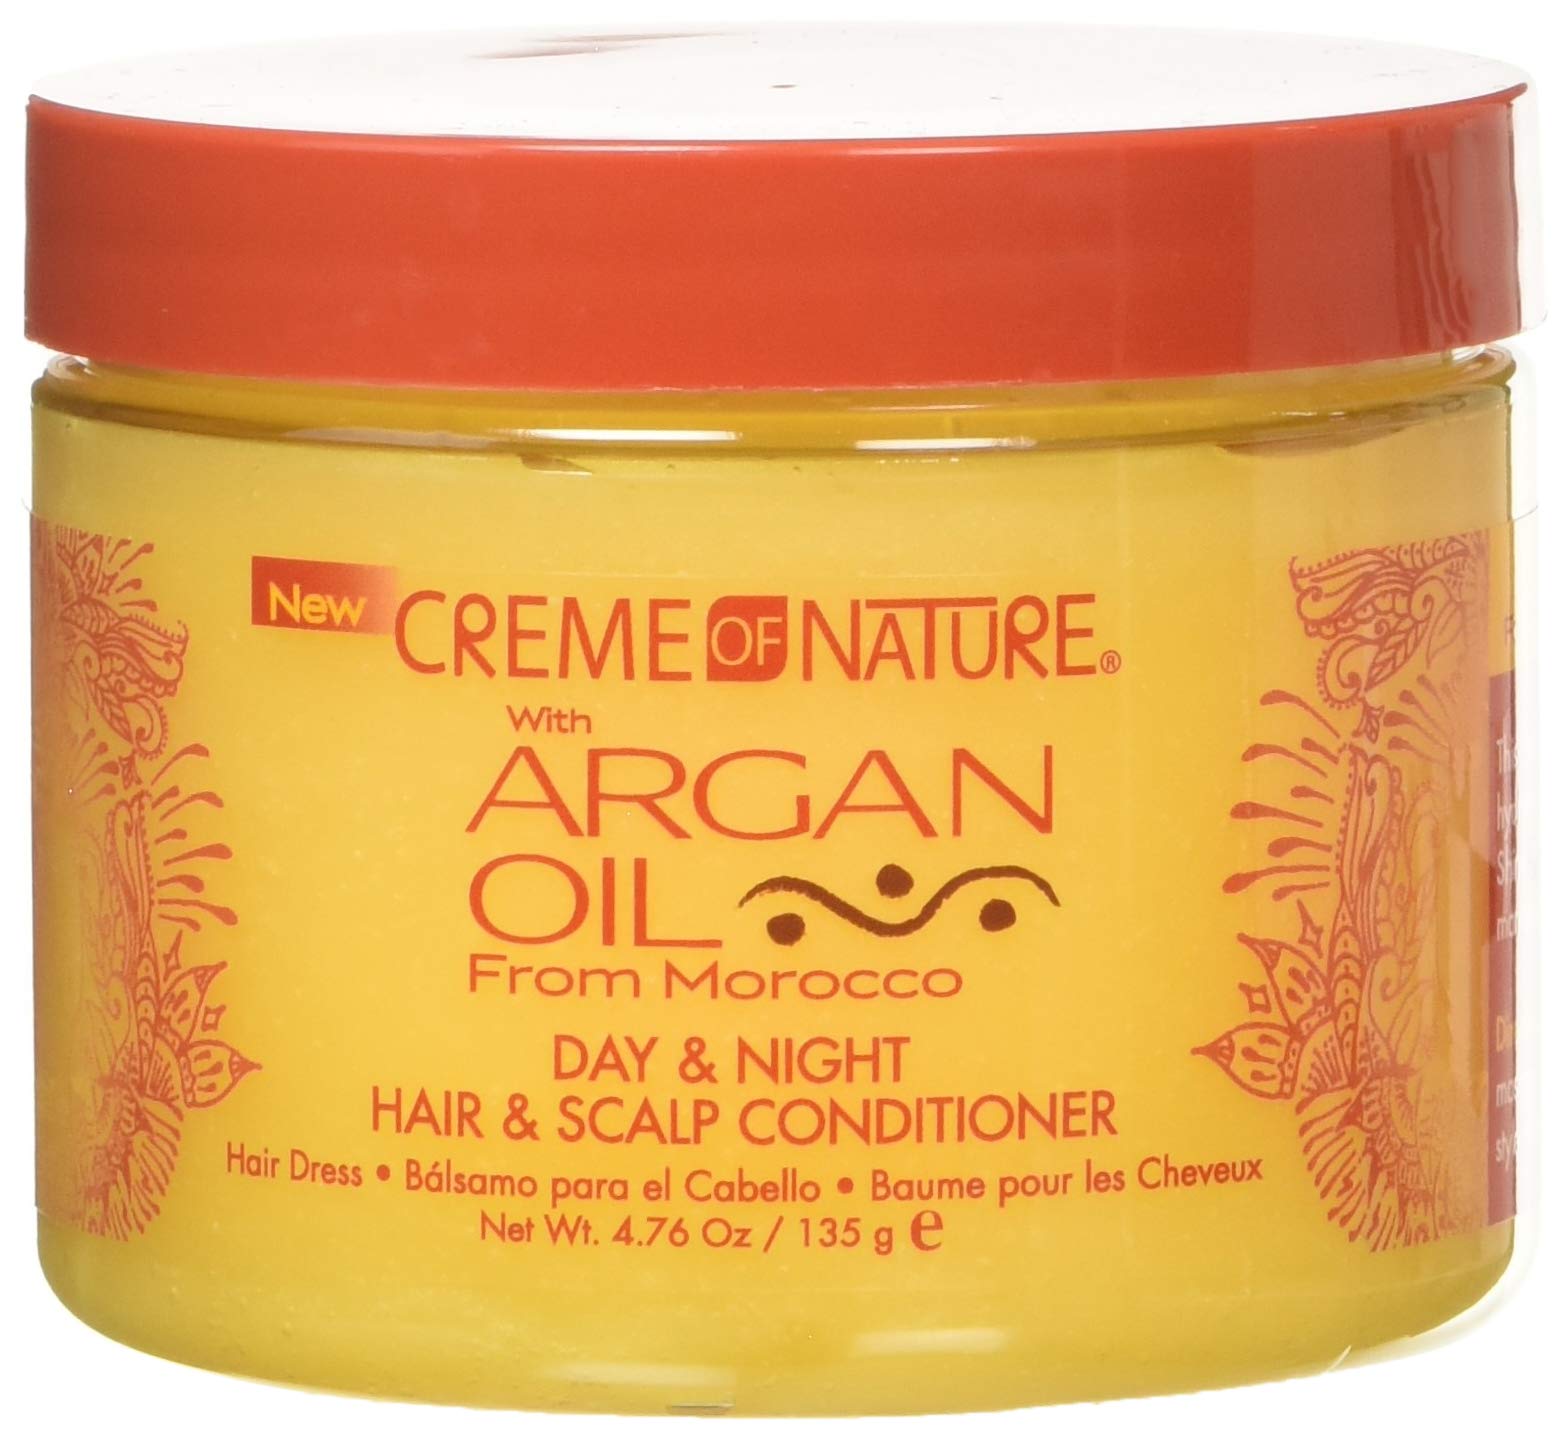 Creme of Nature Hair & Scalp Conditioner With Argan Oil, 4.76 Ounce